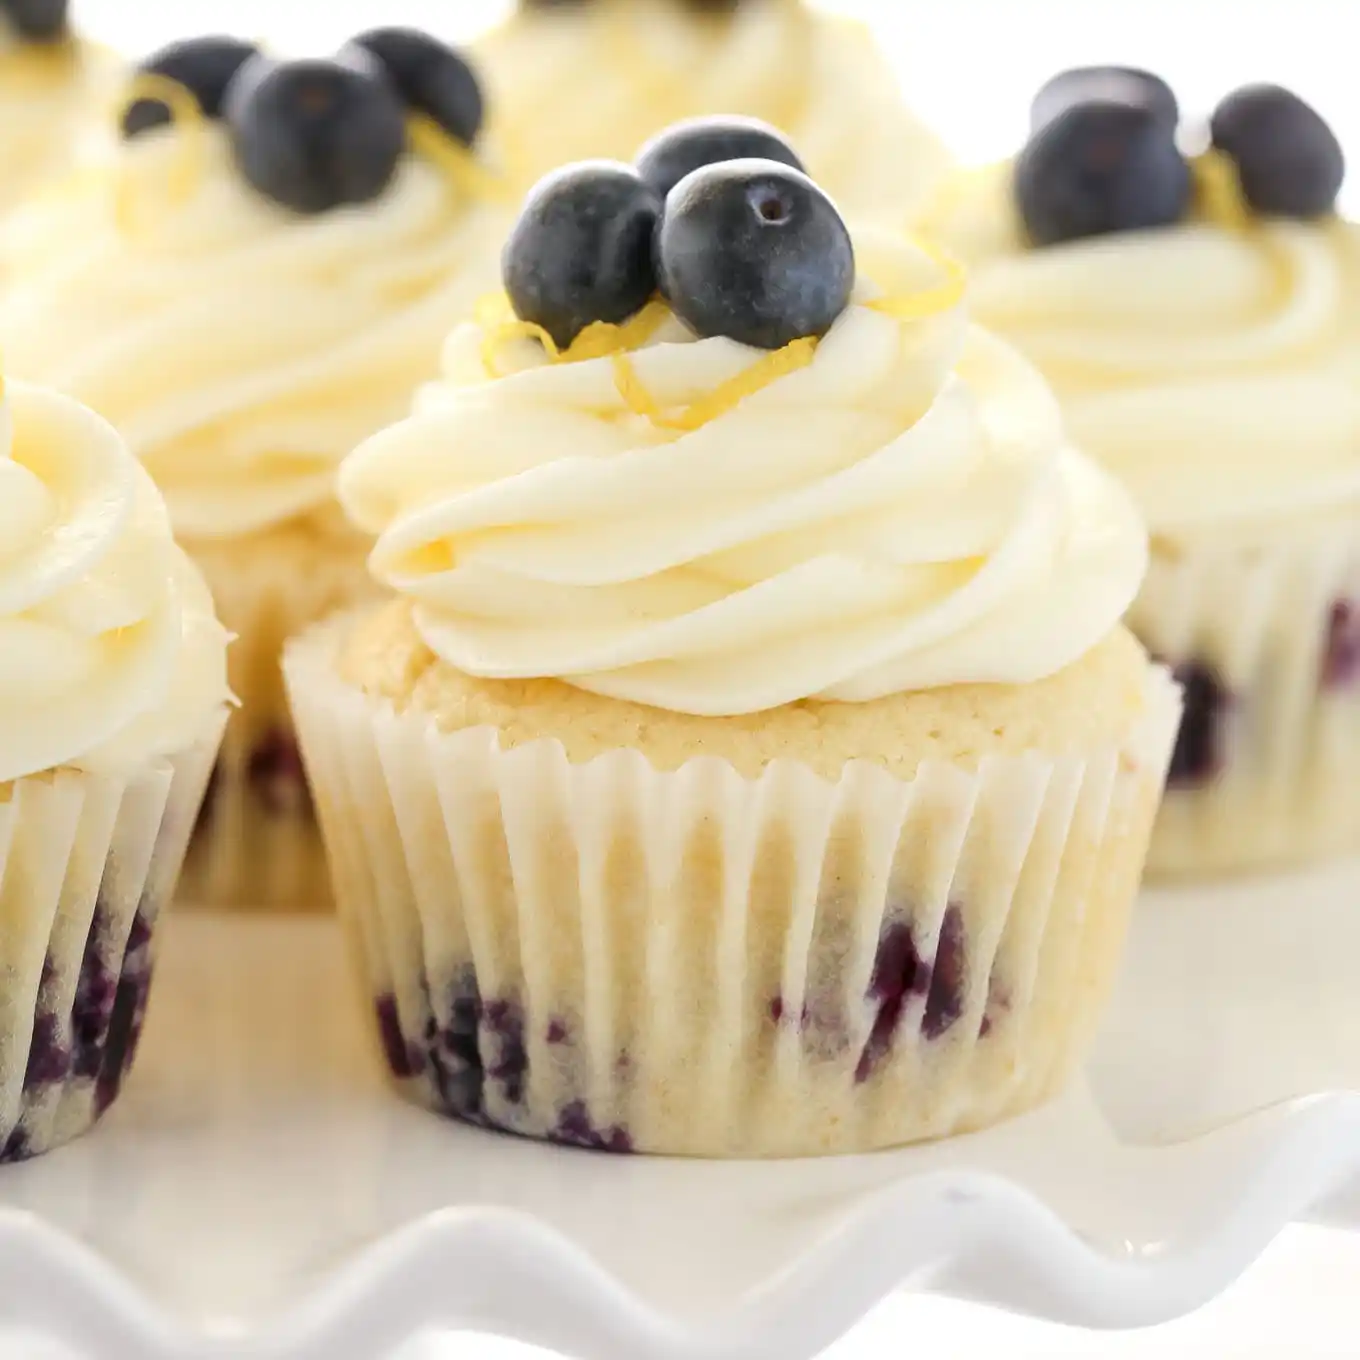 Lemon Curd and Bluberry Cupcakes